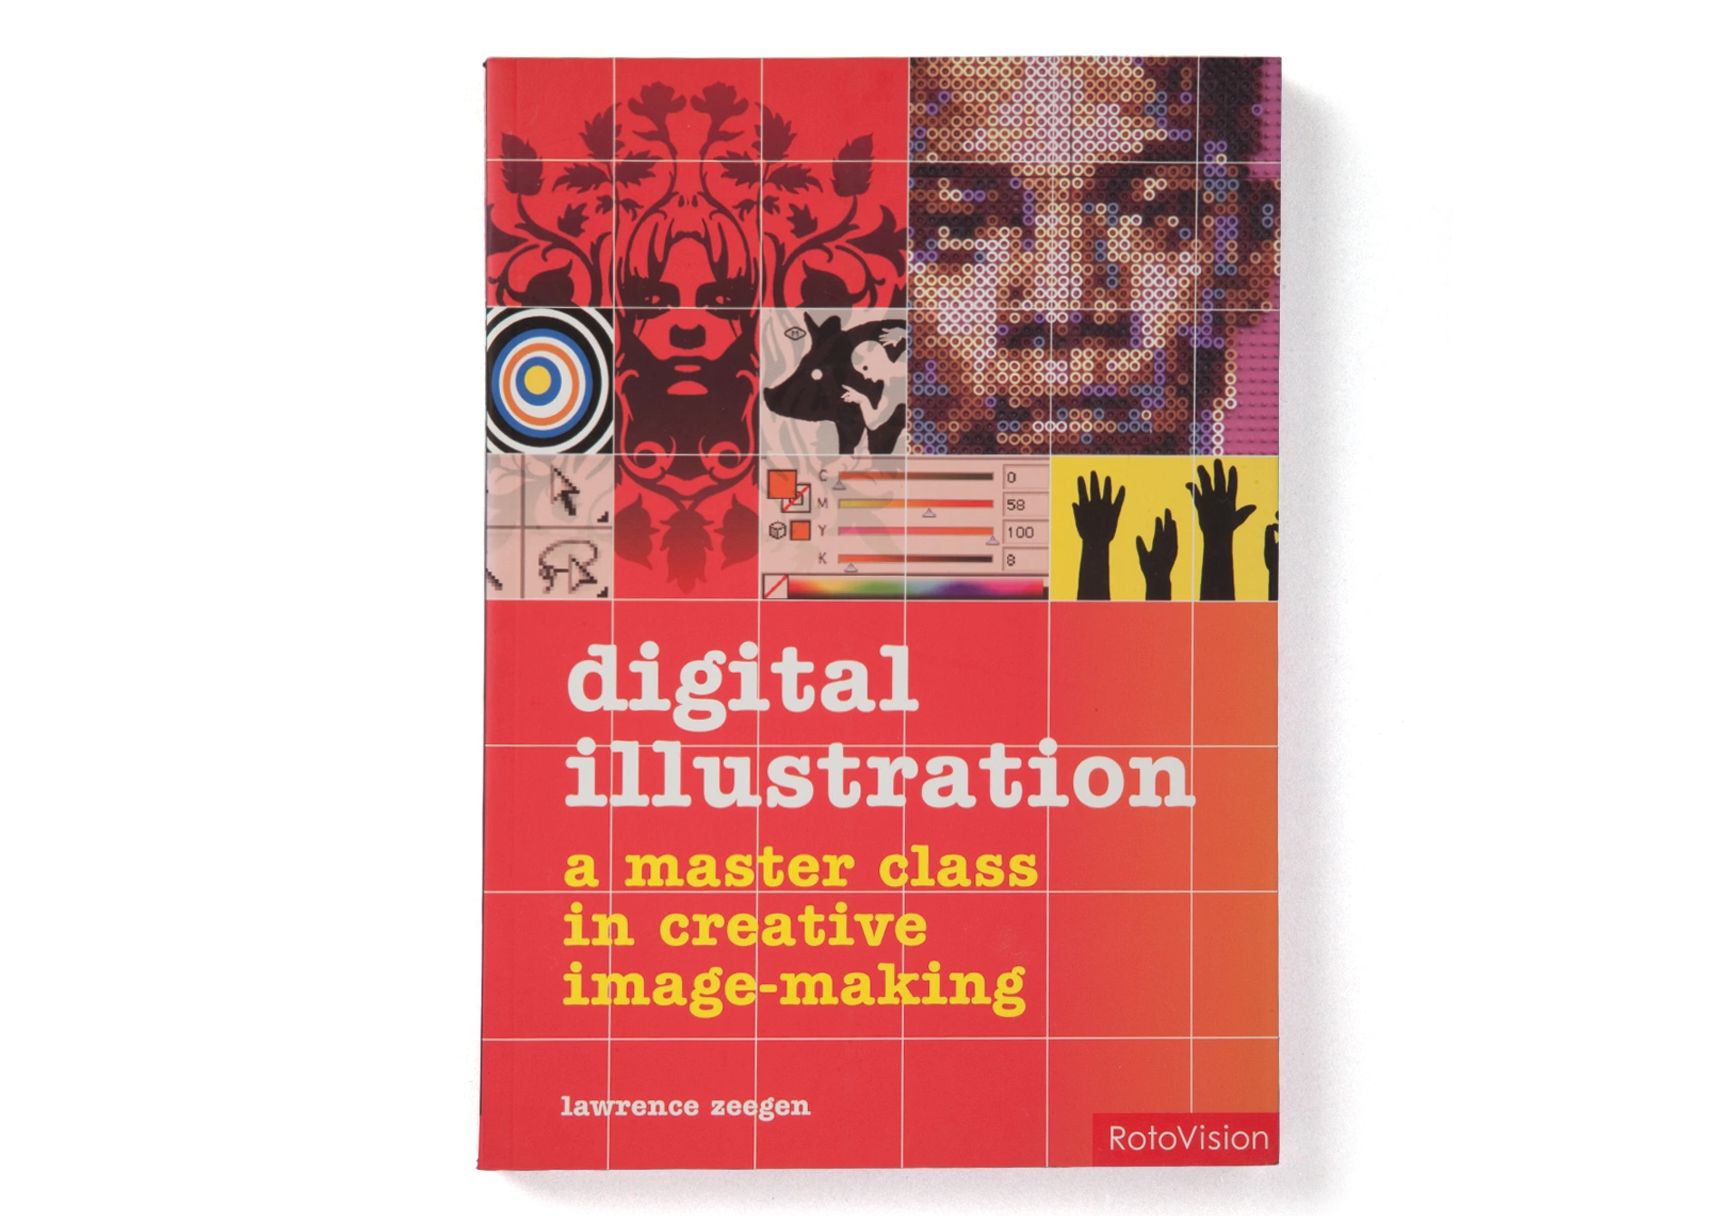 Digital Illustration / A Master Class in Creative Image-making
Rotovision